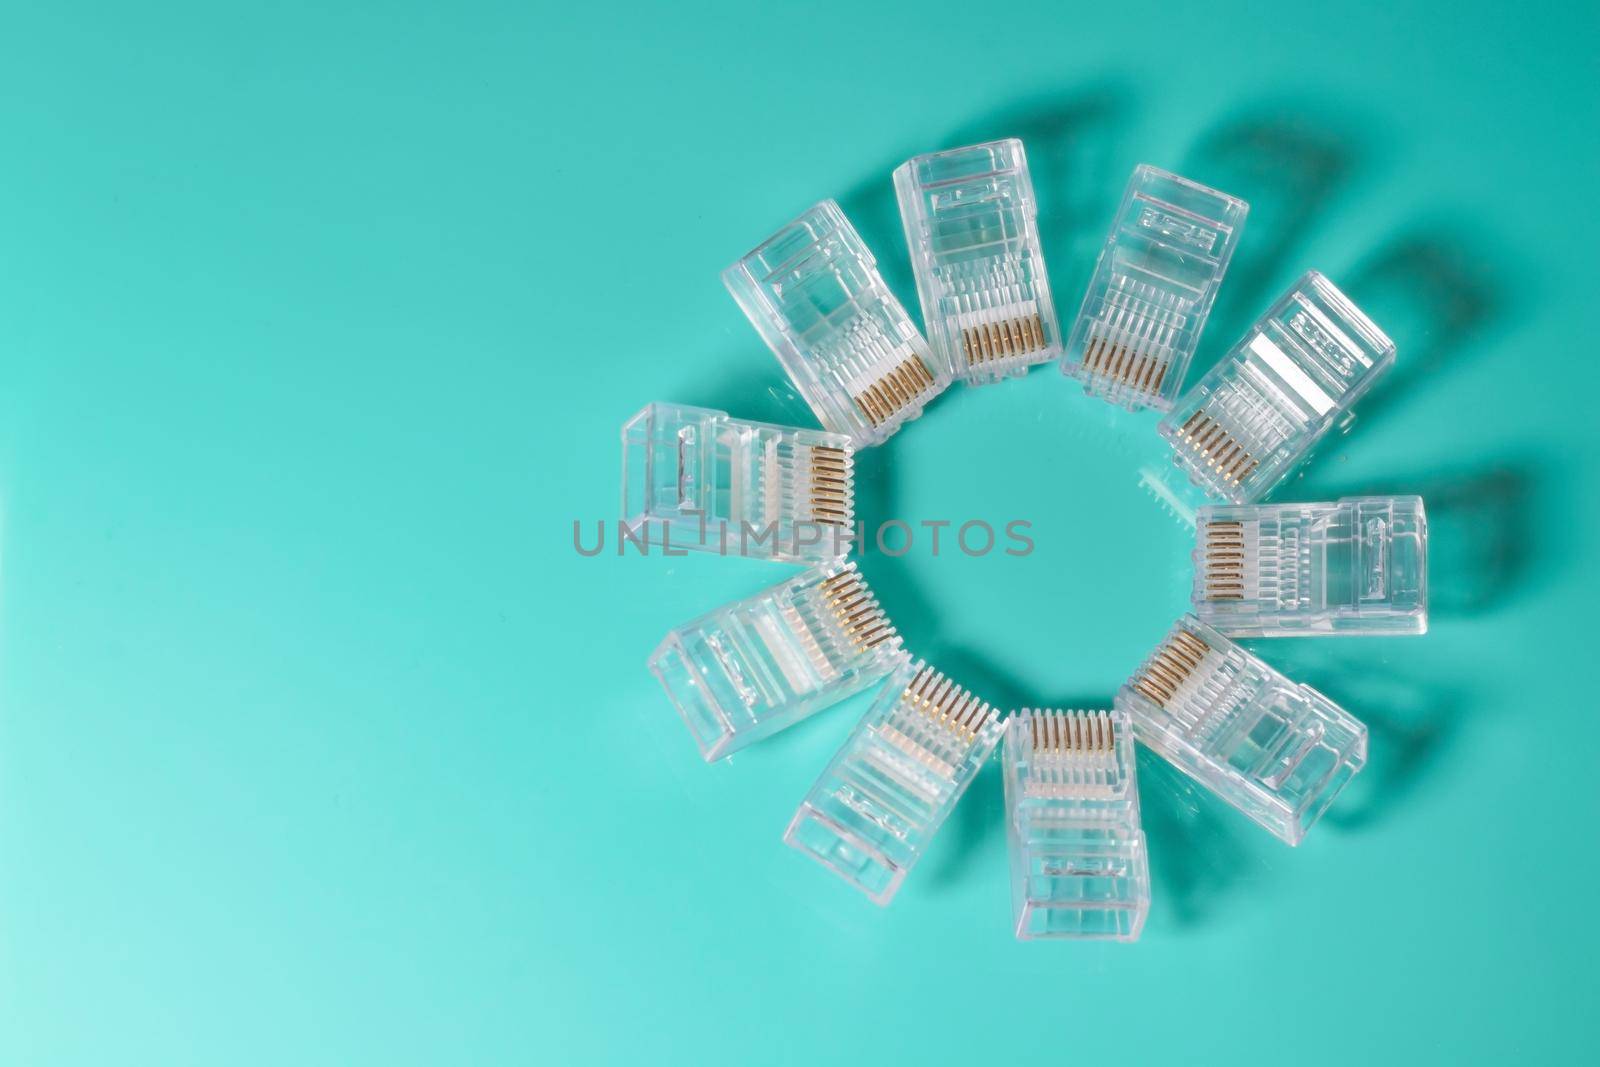 Transparent plug ethernet rj-45 connector to connect to the Internet isolated background.